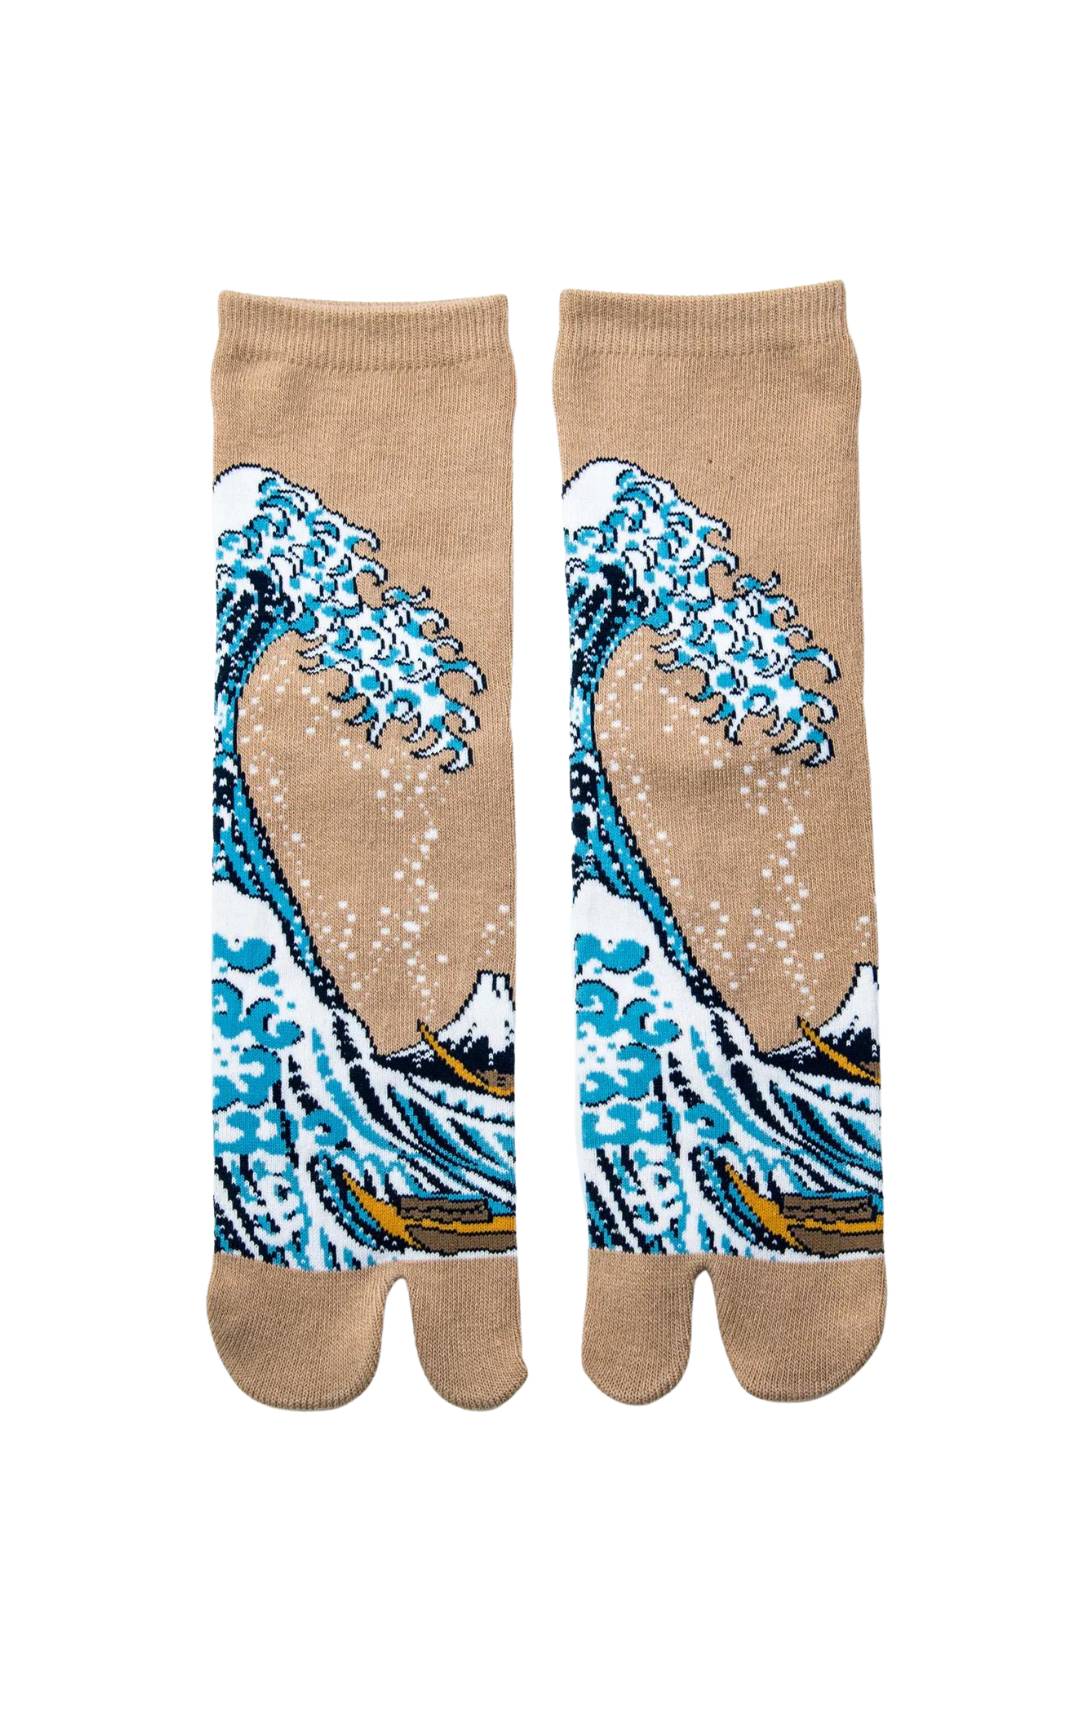 This is a photo of the product name Hokusai The Great Wave Tabi Socks Taupe, which is inspired by a painting by Hokusai Katsushika of Japan by NINJA SOCKS